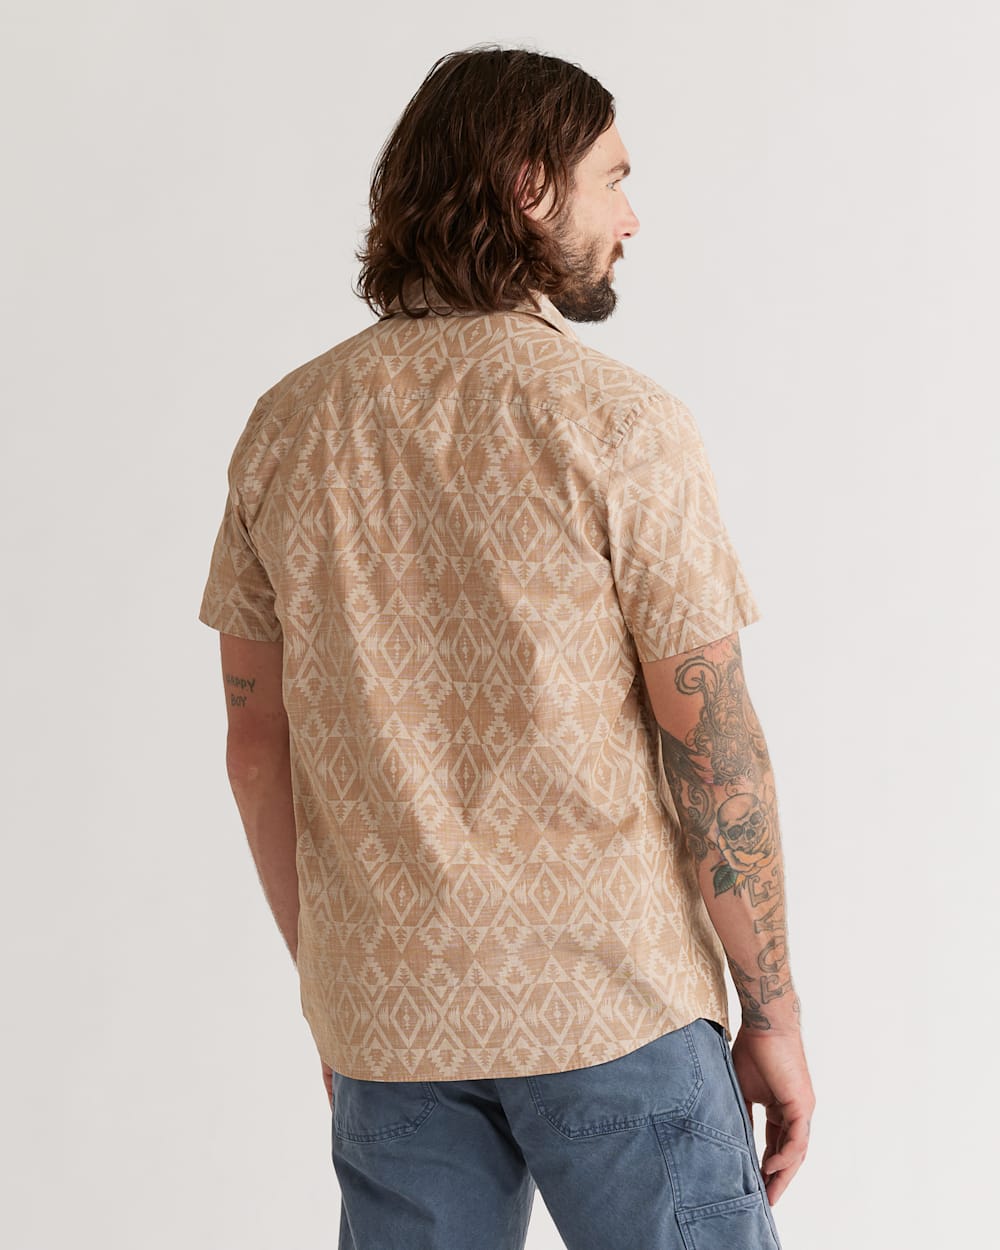 ALTERNATE VIEW OF MEN'S SHORT-SLEEVE DEACON CHAMBRAY SHIRT IN BROWN image number 3